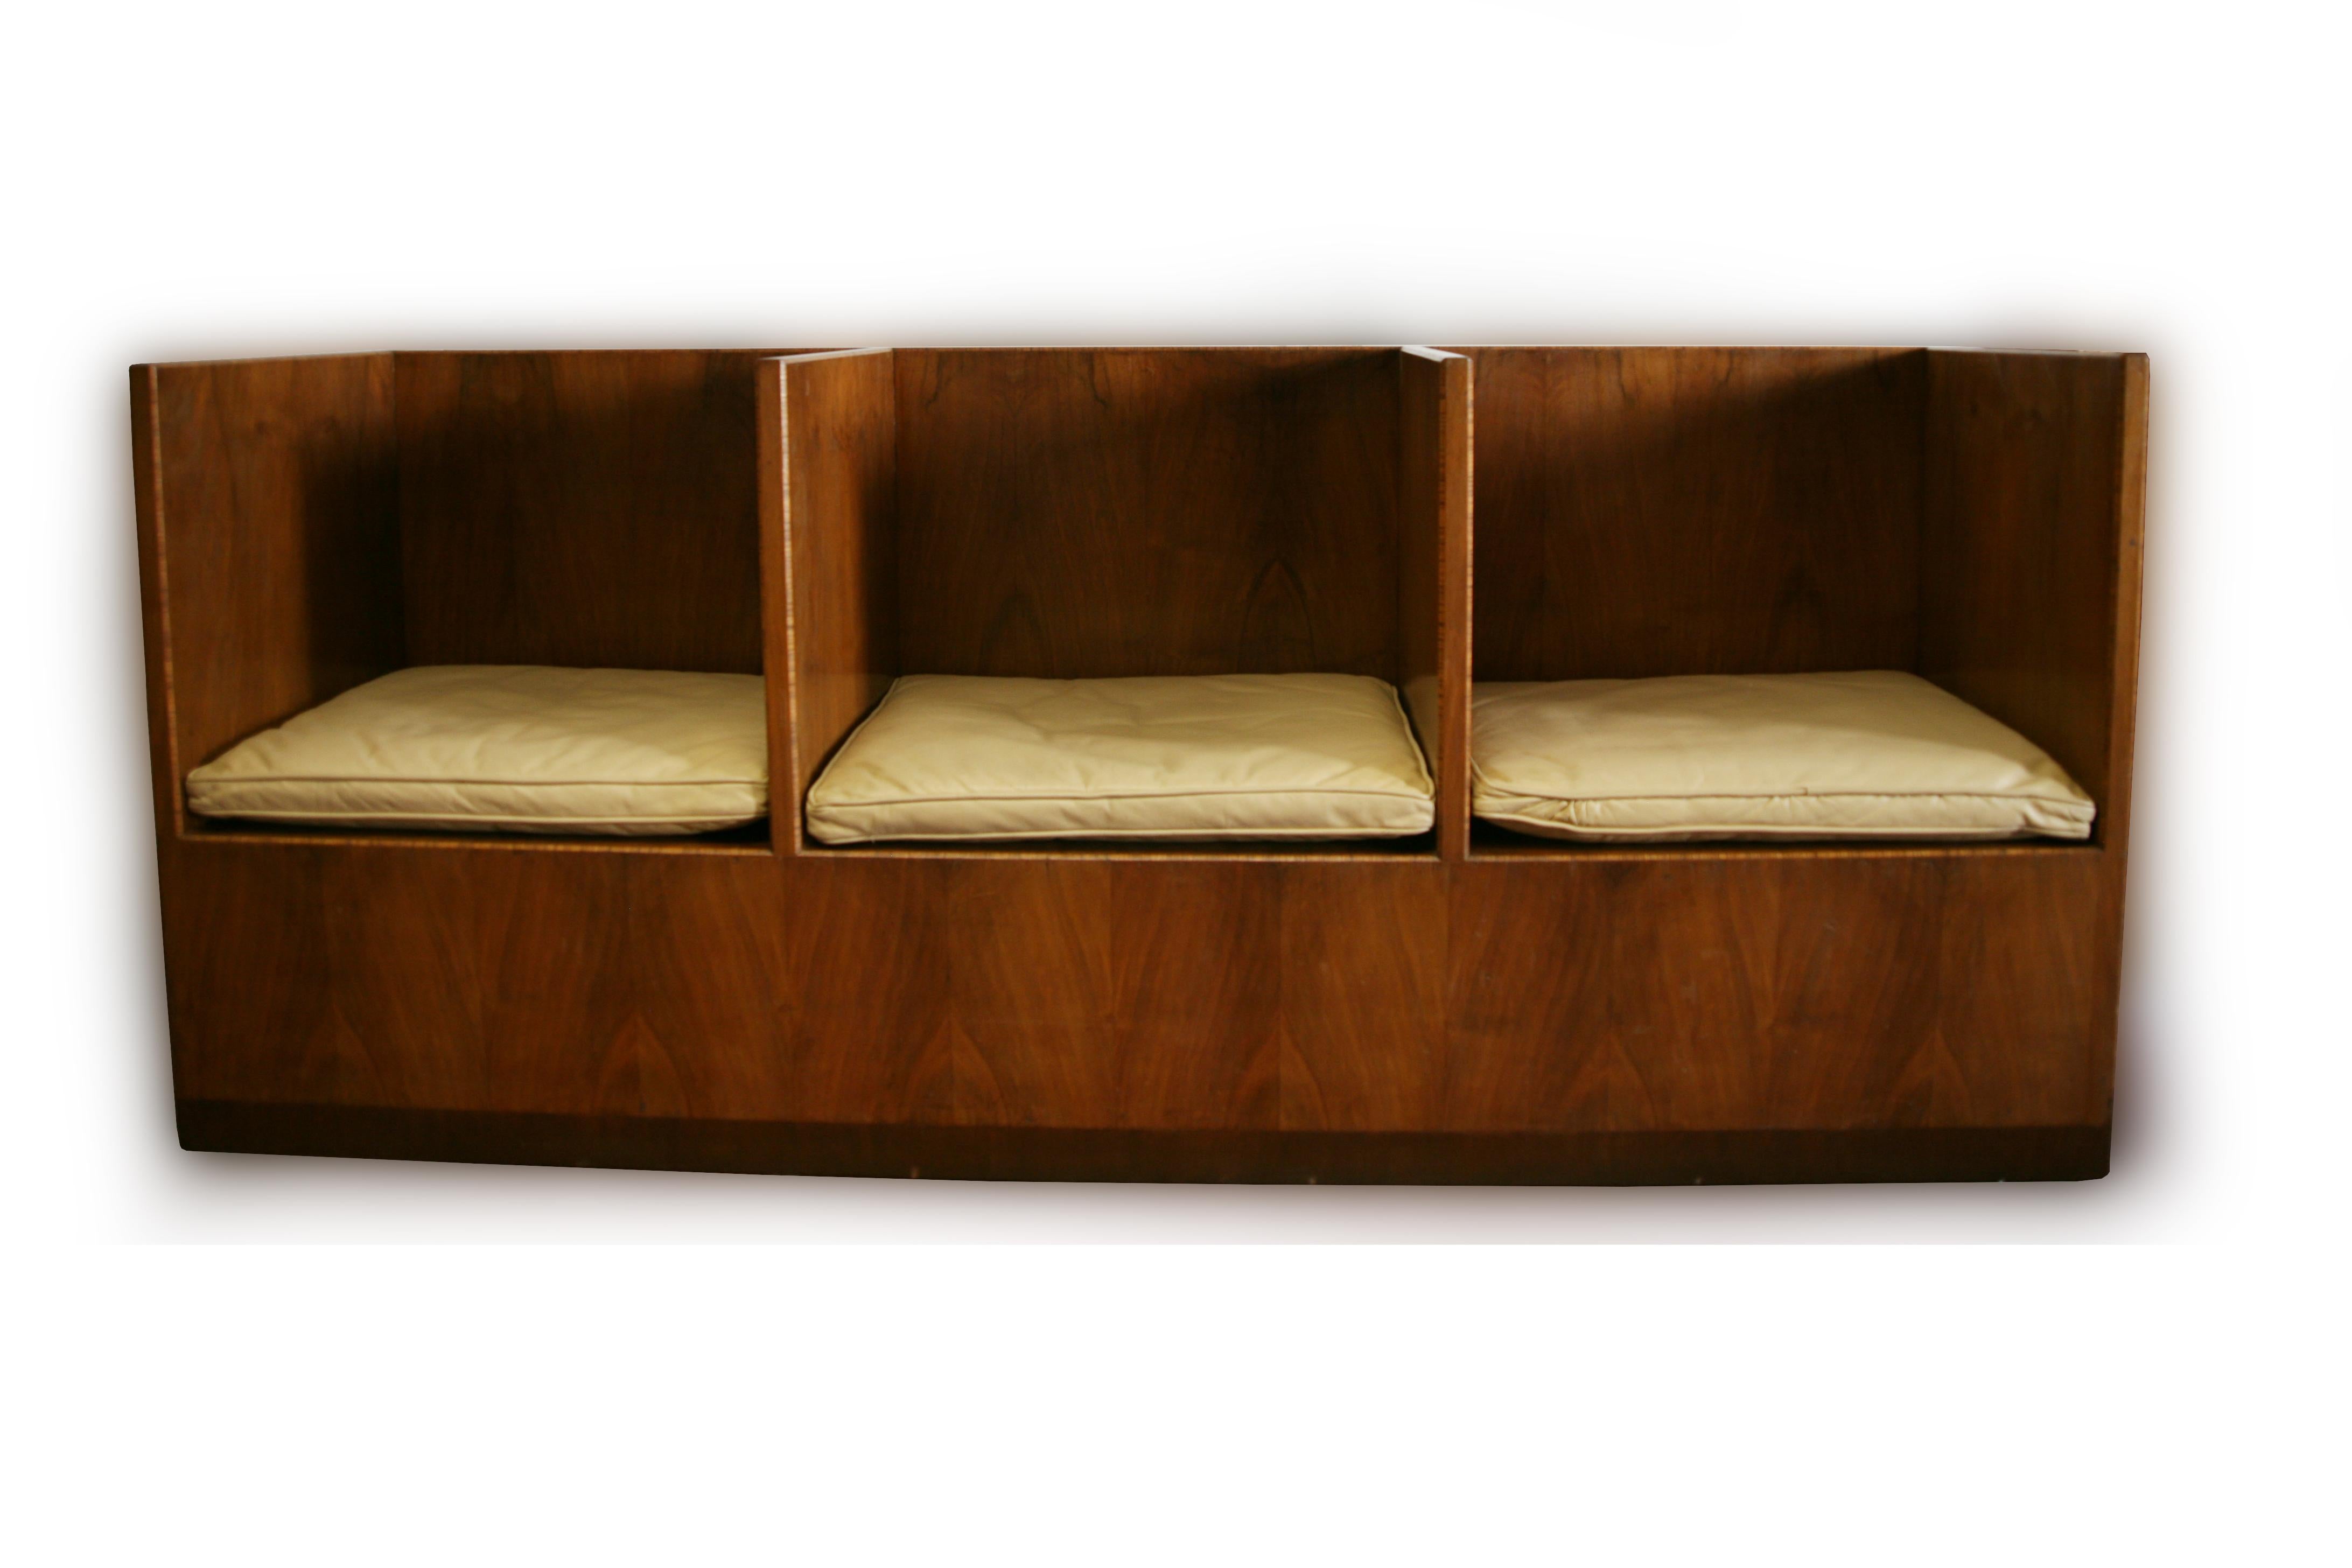 Midcentury Triple-Seat Settee Sofa Chair in Walnut Wooden Modern Style Rustic For Sale 4